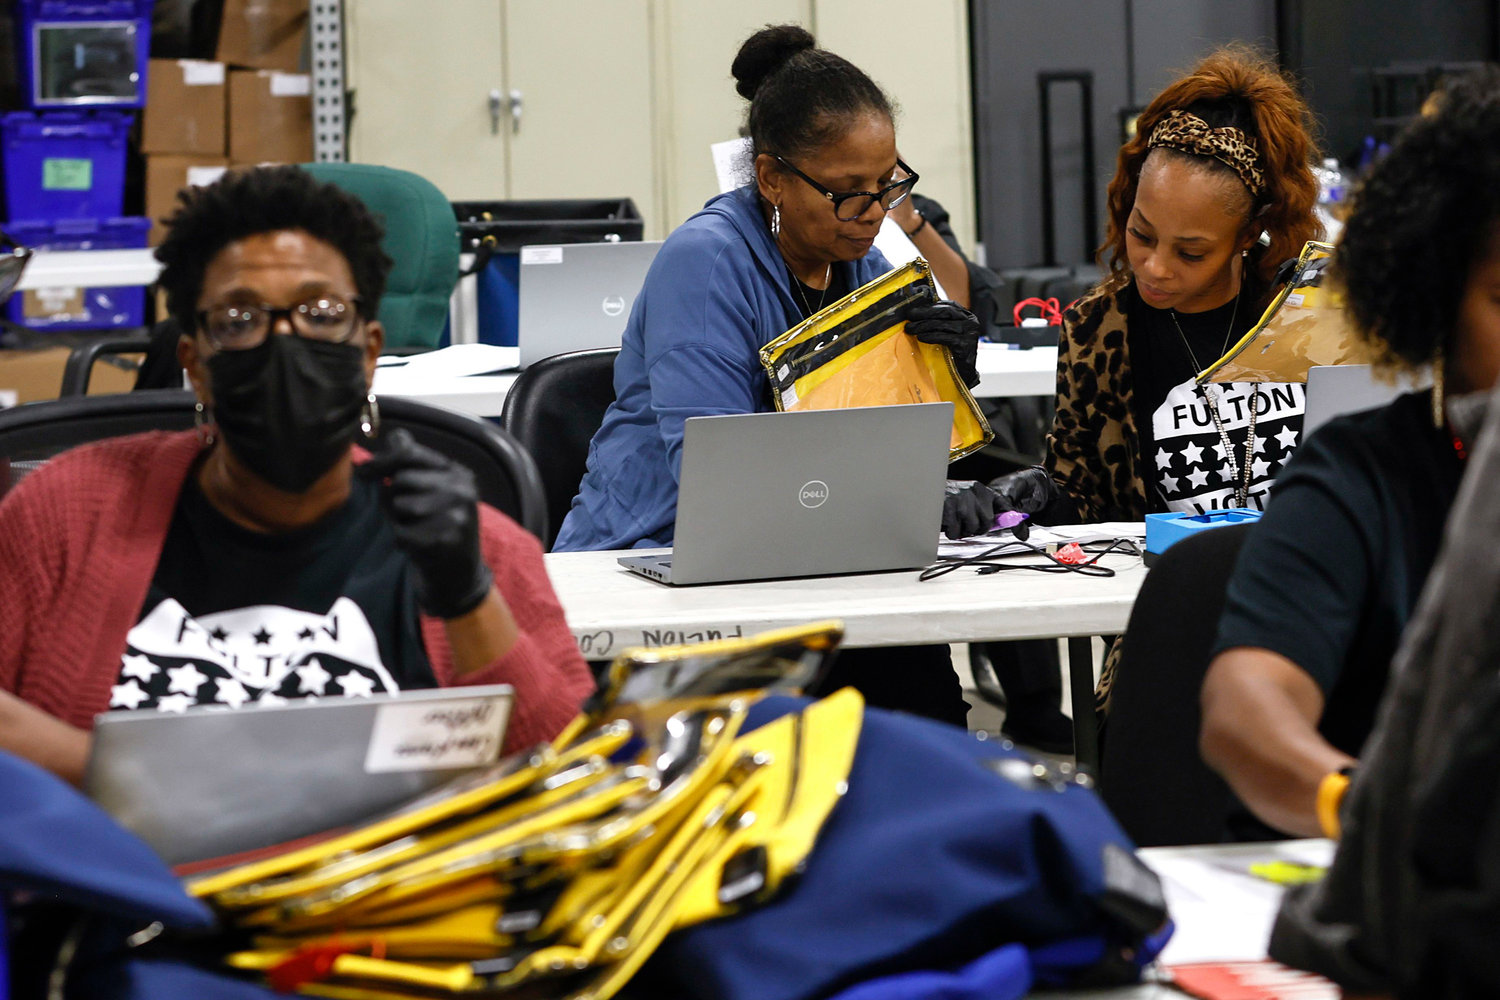 Poll workers prepare to open pouches containing voter memory cards from various precincts at The Fulton County Elections Warehouse on Tuesday, Nov. 8, 2022. (Natrice Miller/The Atlanta Journal-Constitution/TNS)